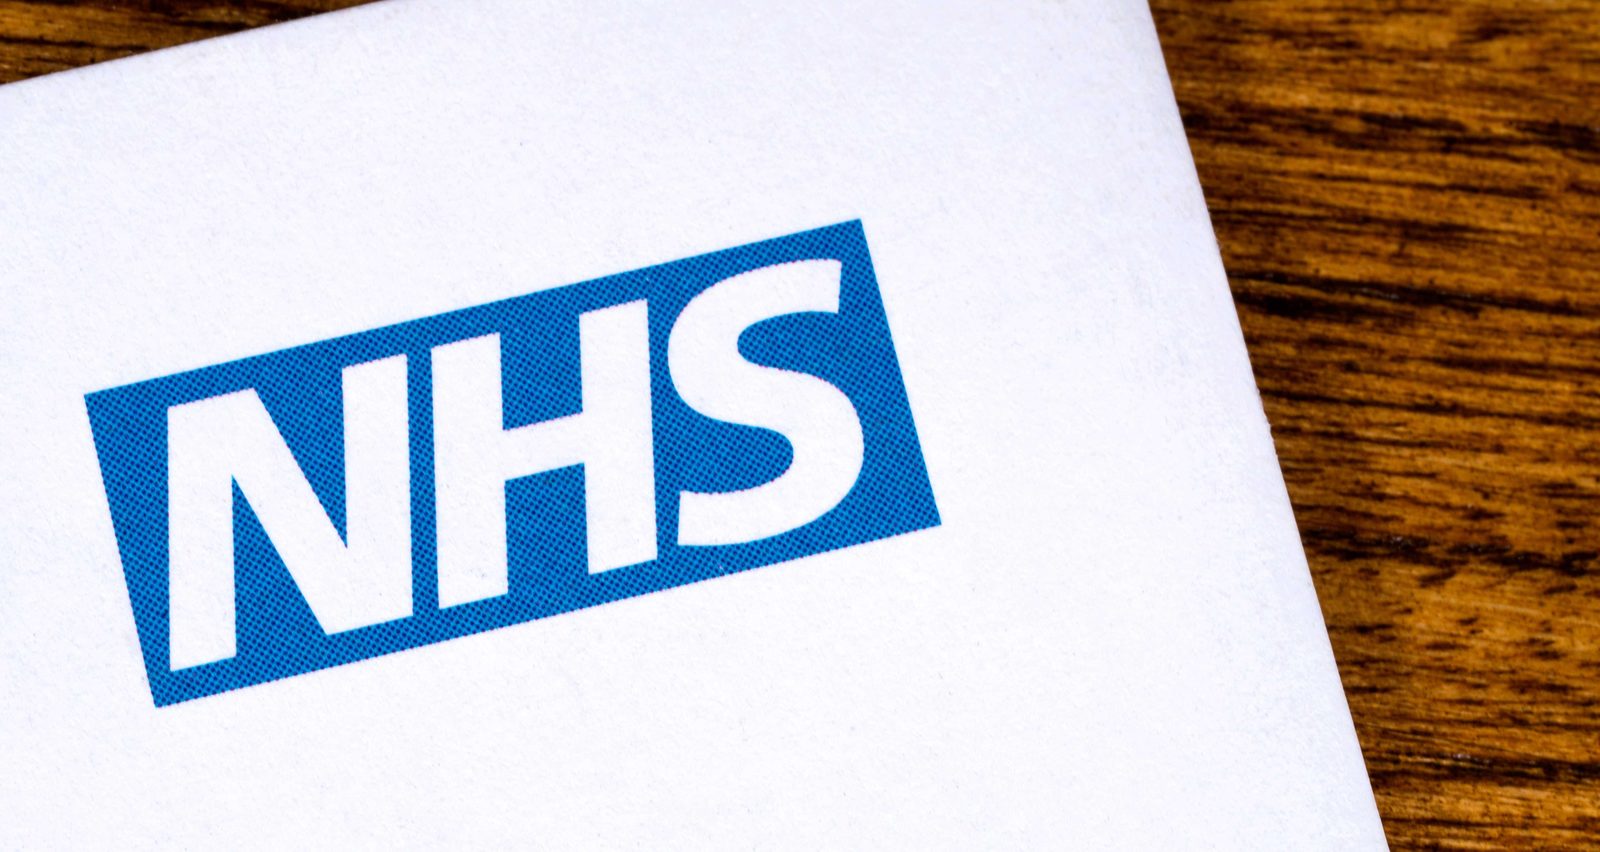 NHS staff due to receive 6.5% pay rise - Dentistry.co.uk1600 x 852